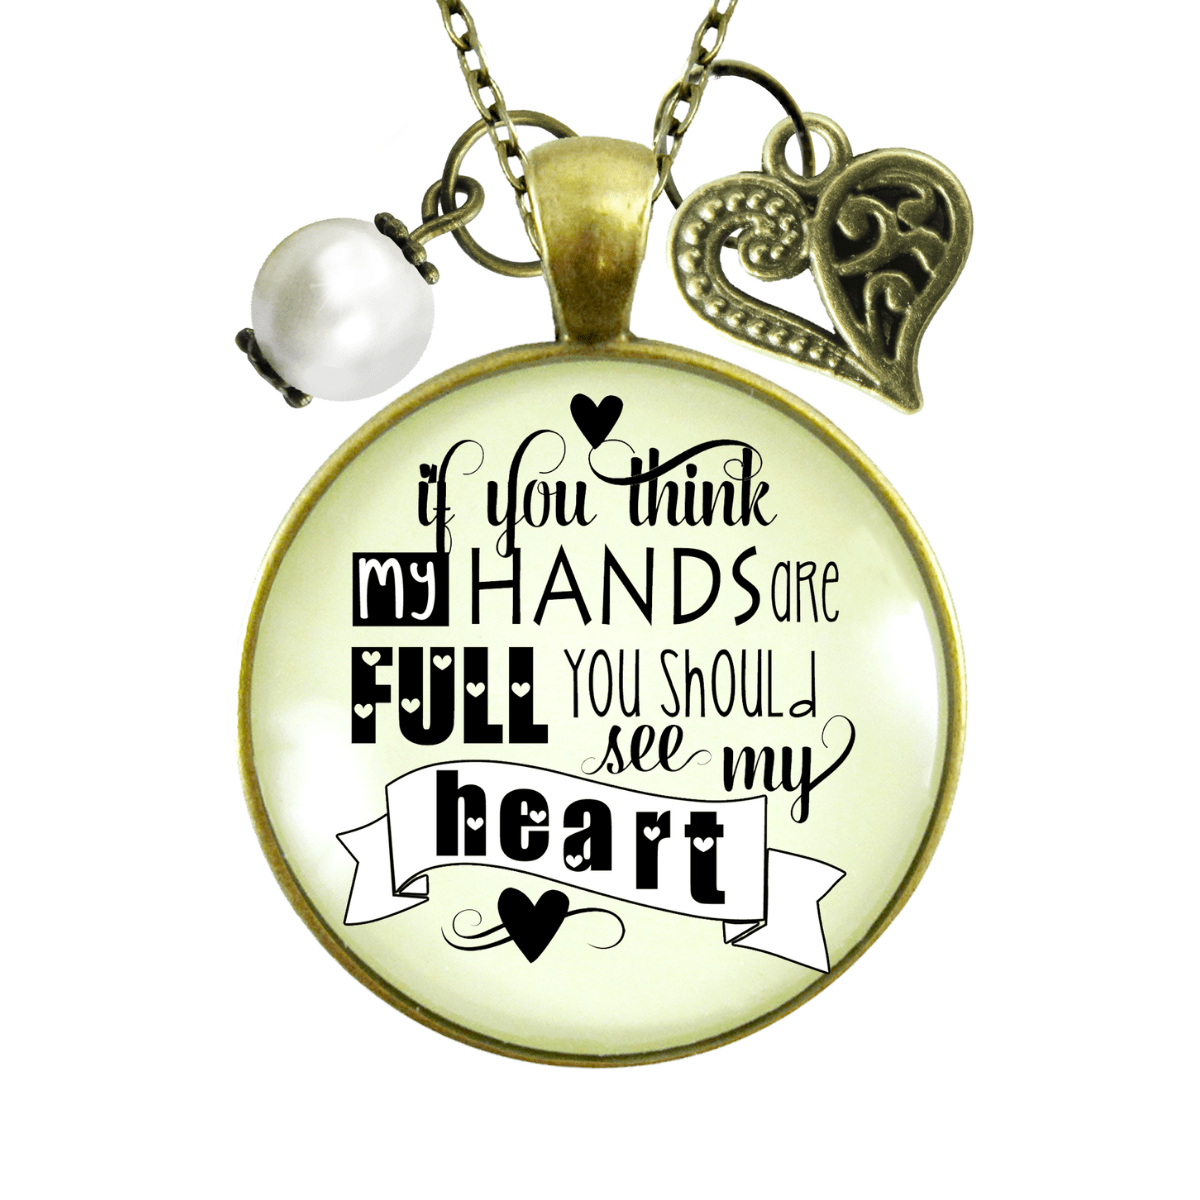 Gutsy Goodness Full Heart Necklace Think Hands are Full Kindness Quote Inspirational Jewelry - Gutsy Goodness;Full Heart Necklace Think Hands Are Full Kindness Quote Inspirational Jewelry - Gutsy Goodness Handmade Jewelry Gifts